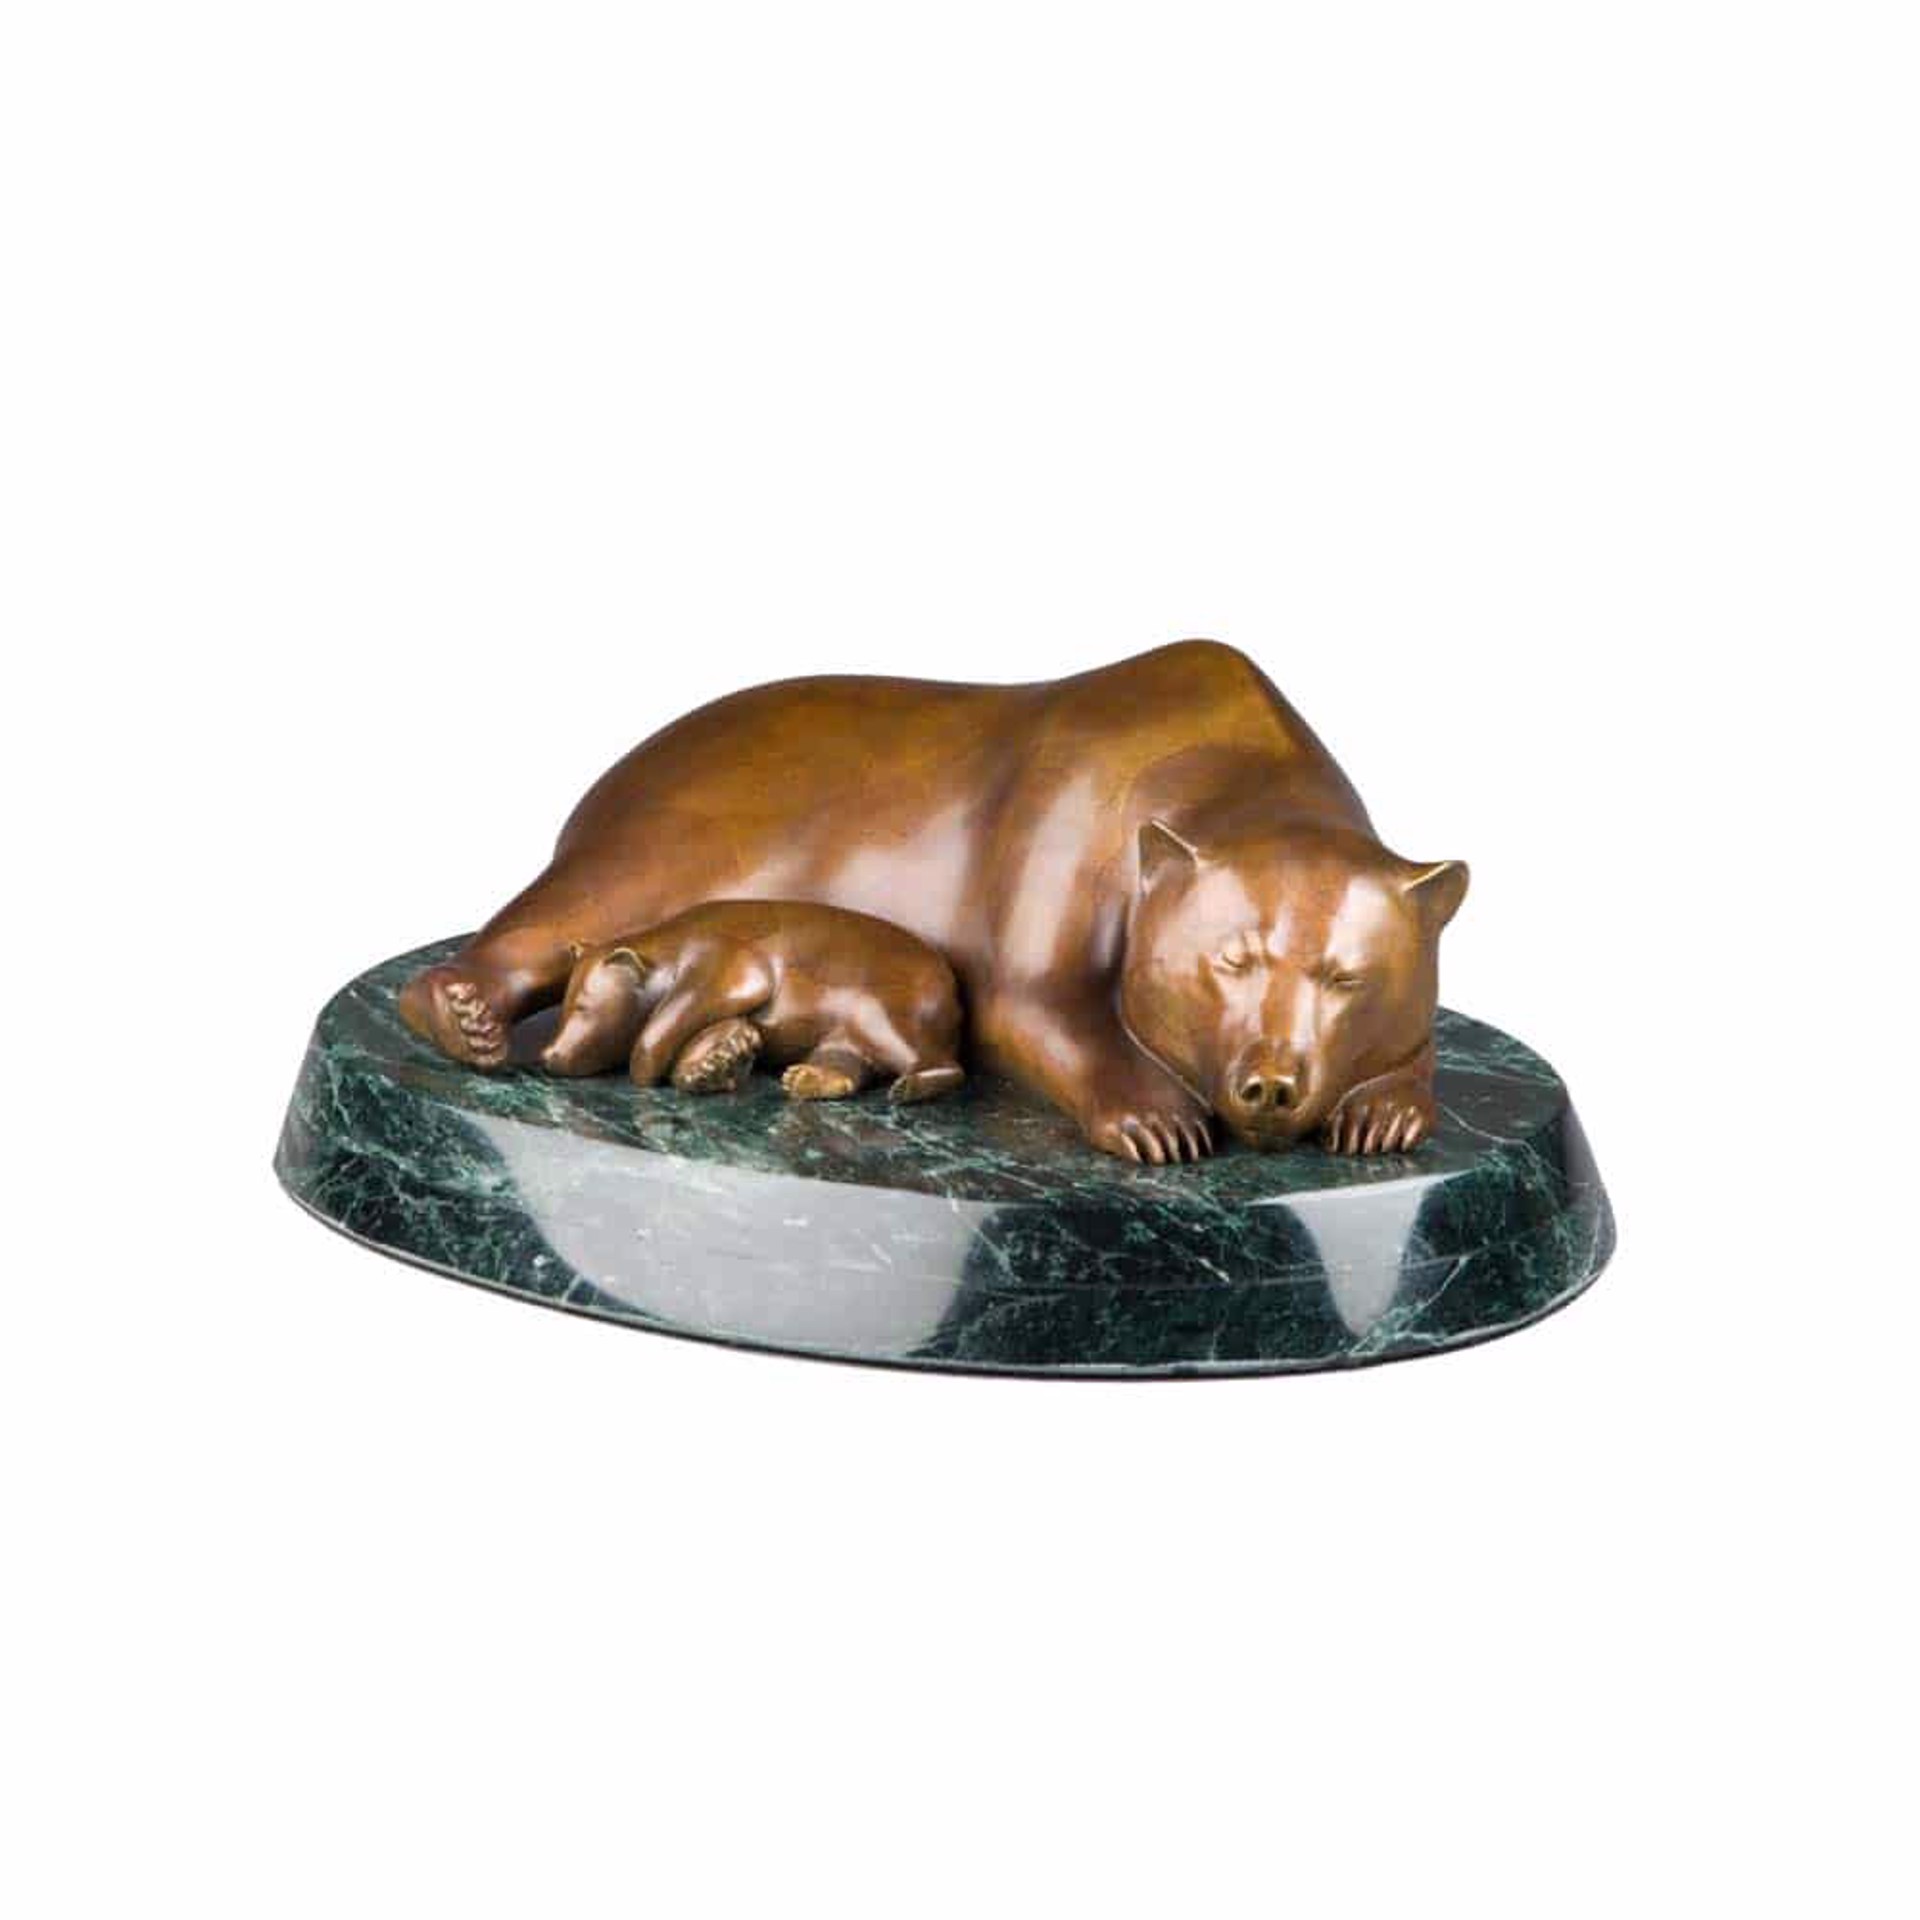 Bear In Hibernation Original Bronze Sculpture by Rip and Alison Caswell, Contemporary Fine Art, Modern Wildlife Art, Available At Gallery Wild